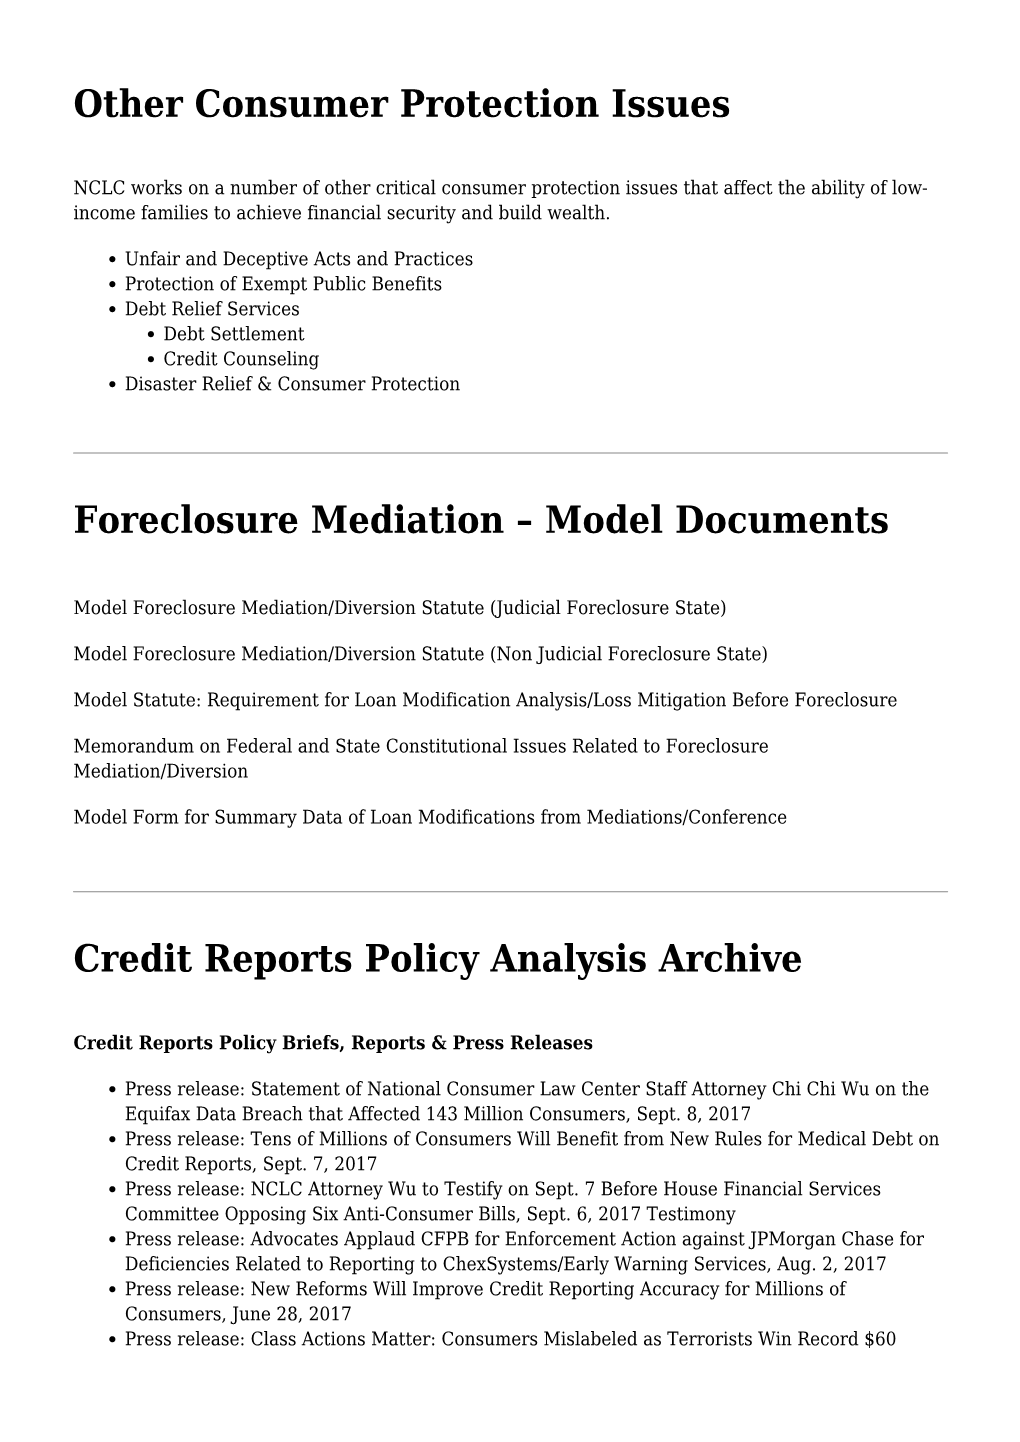 Other Consumer Protection Issues,Foreclosure Mediation &#8211